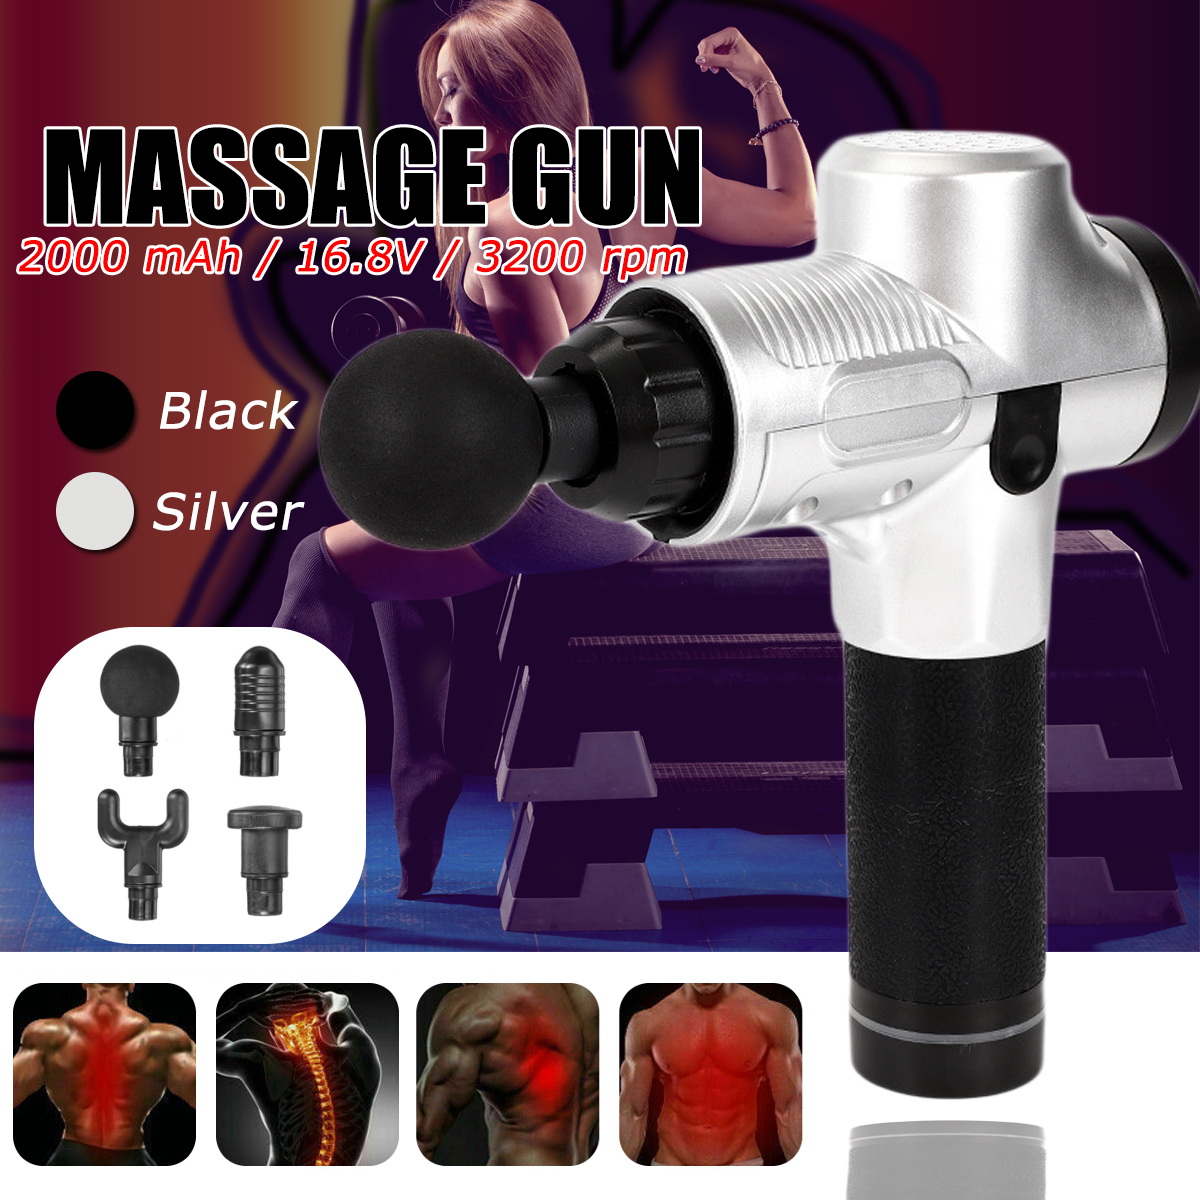 168V-2000mAh-Touch-Screen-20-Speed-Fascia-Muscle-Relaxation-Massager-Display-Gym-High-Frequency-Vibr-1581561-2